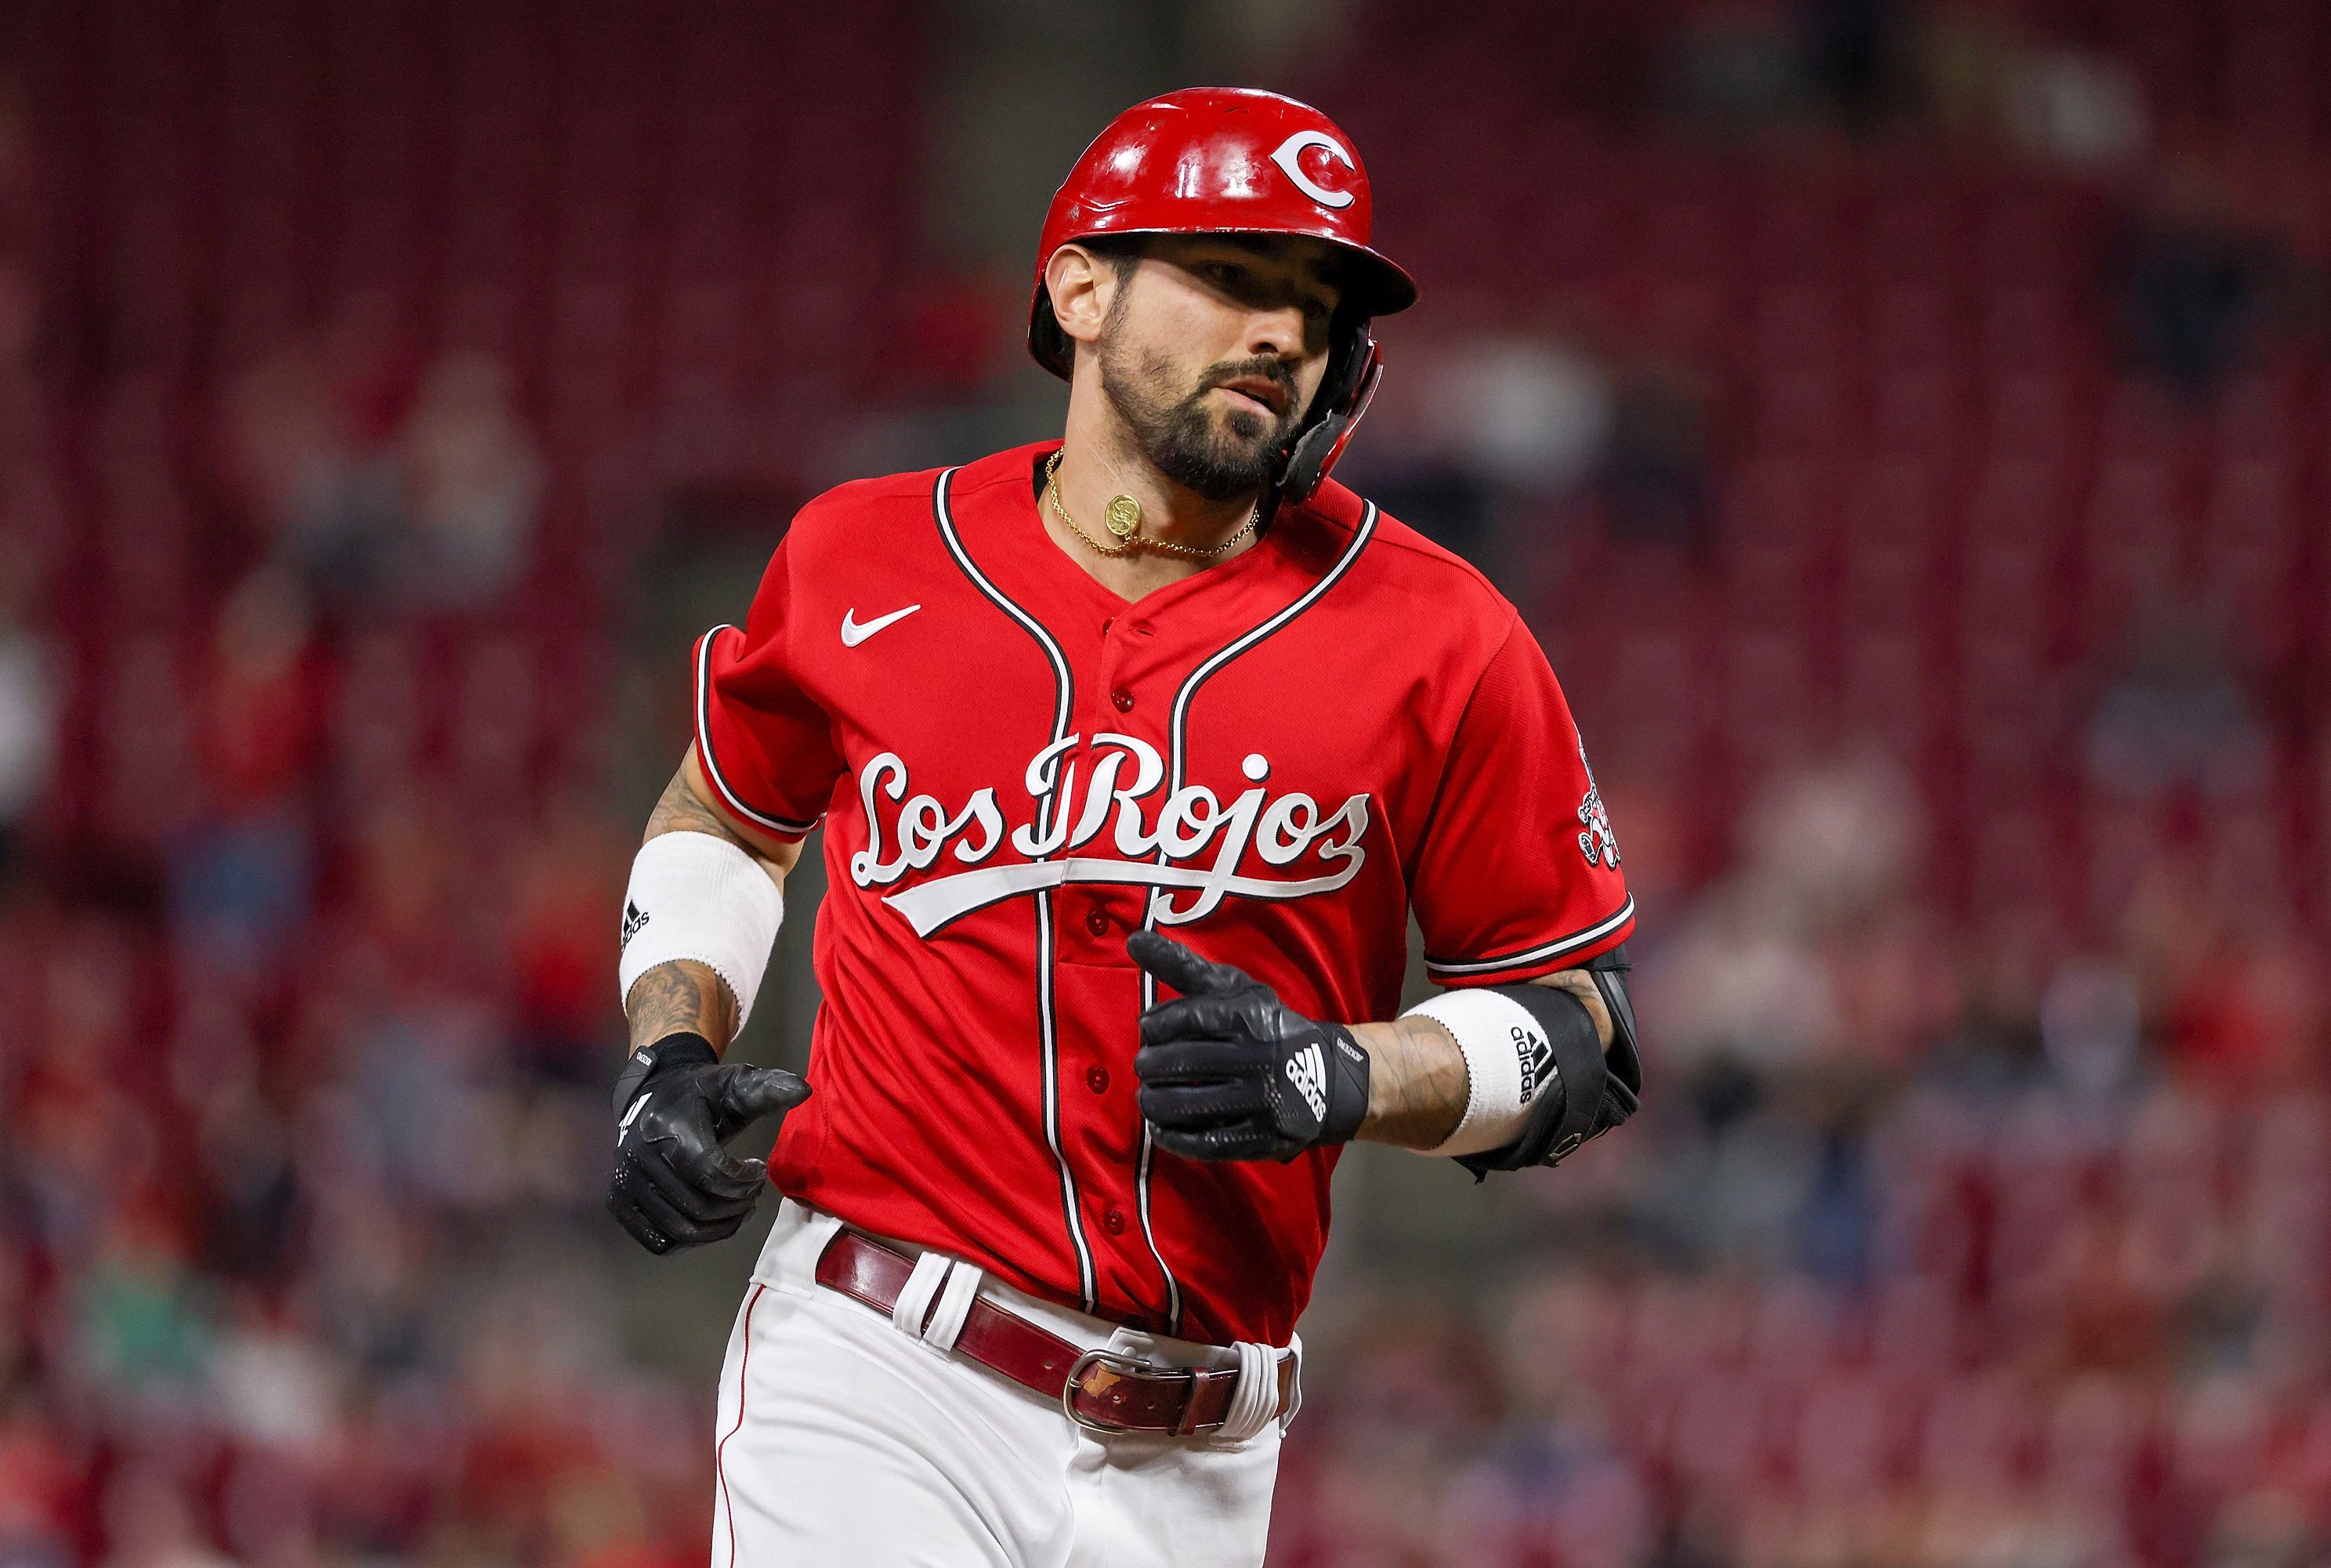 2021 MLB Preview: Ranking the top 20 outfielders in the league